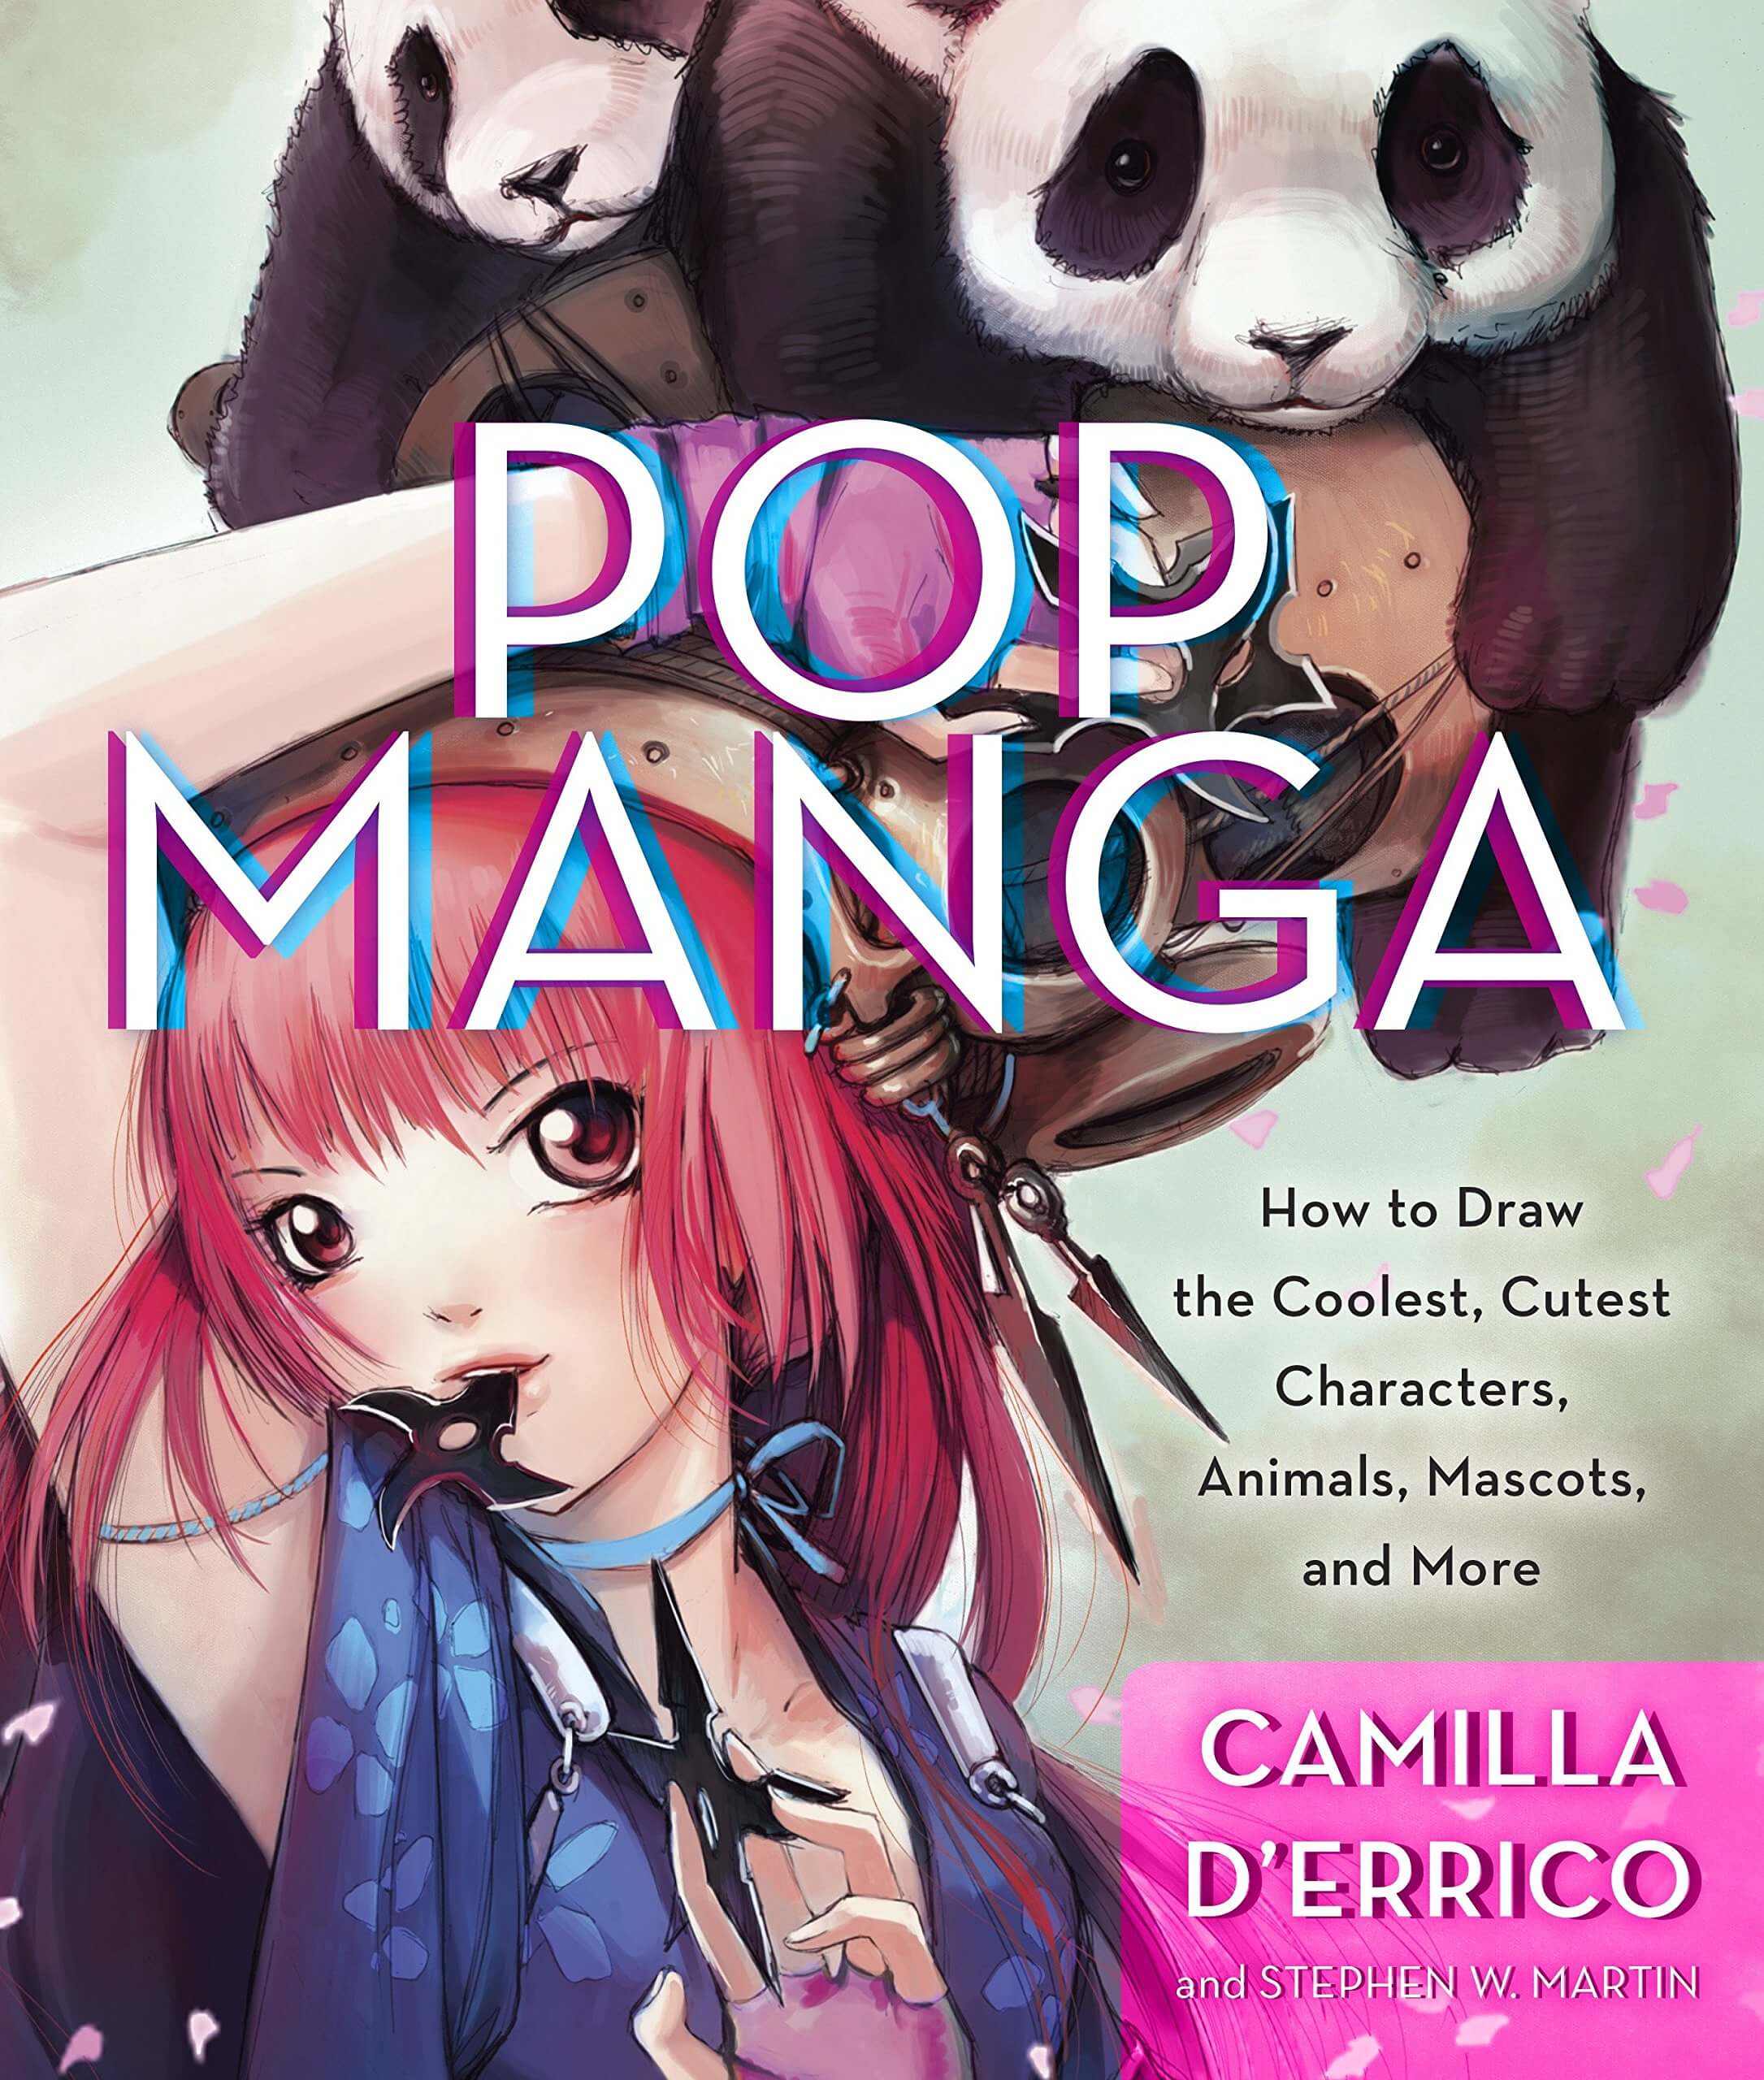 Books to Learn How to Draw Manga Characters